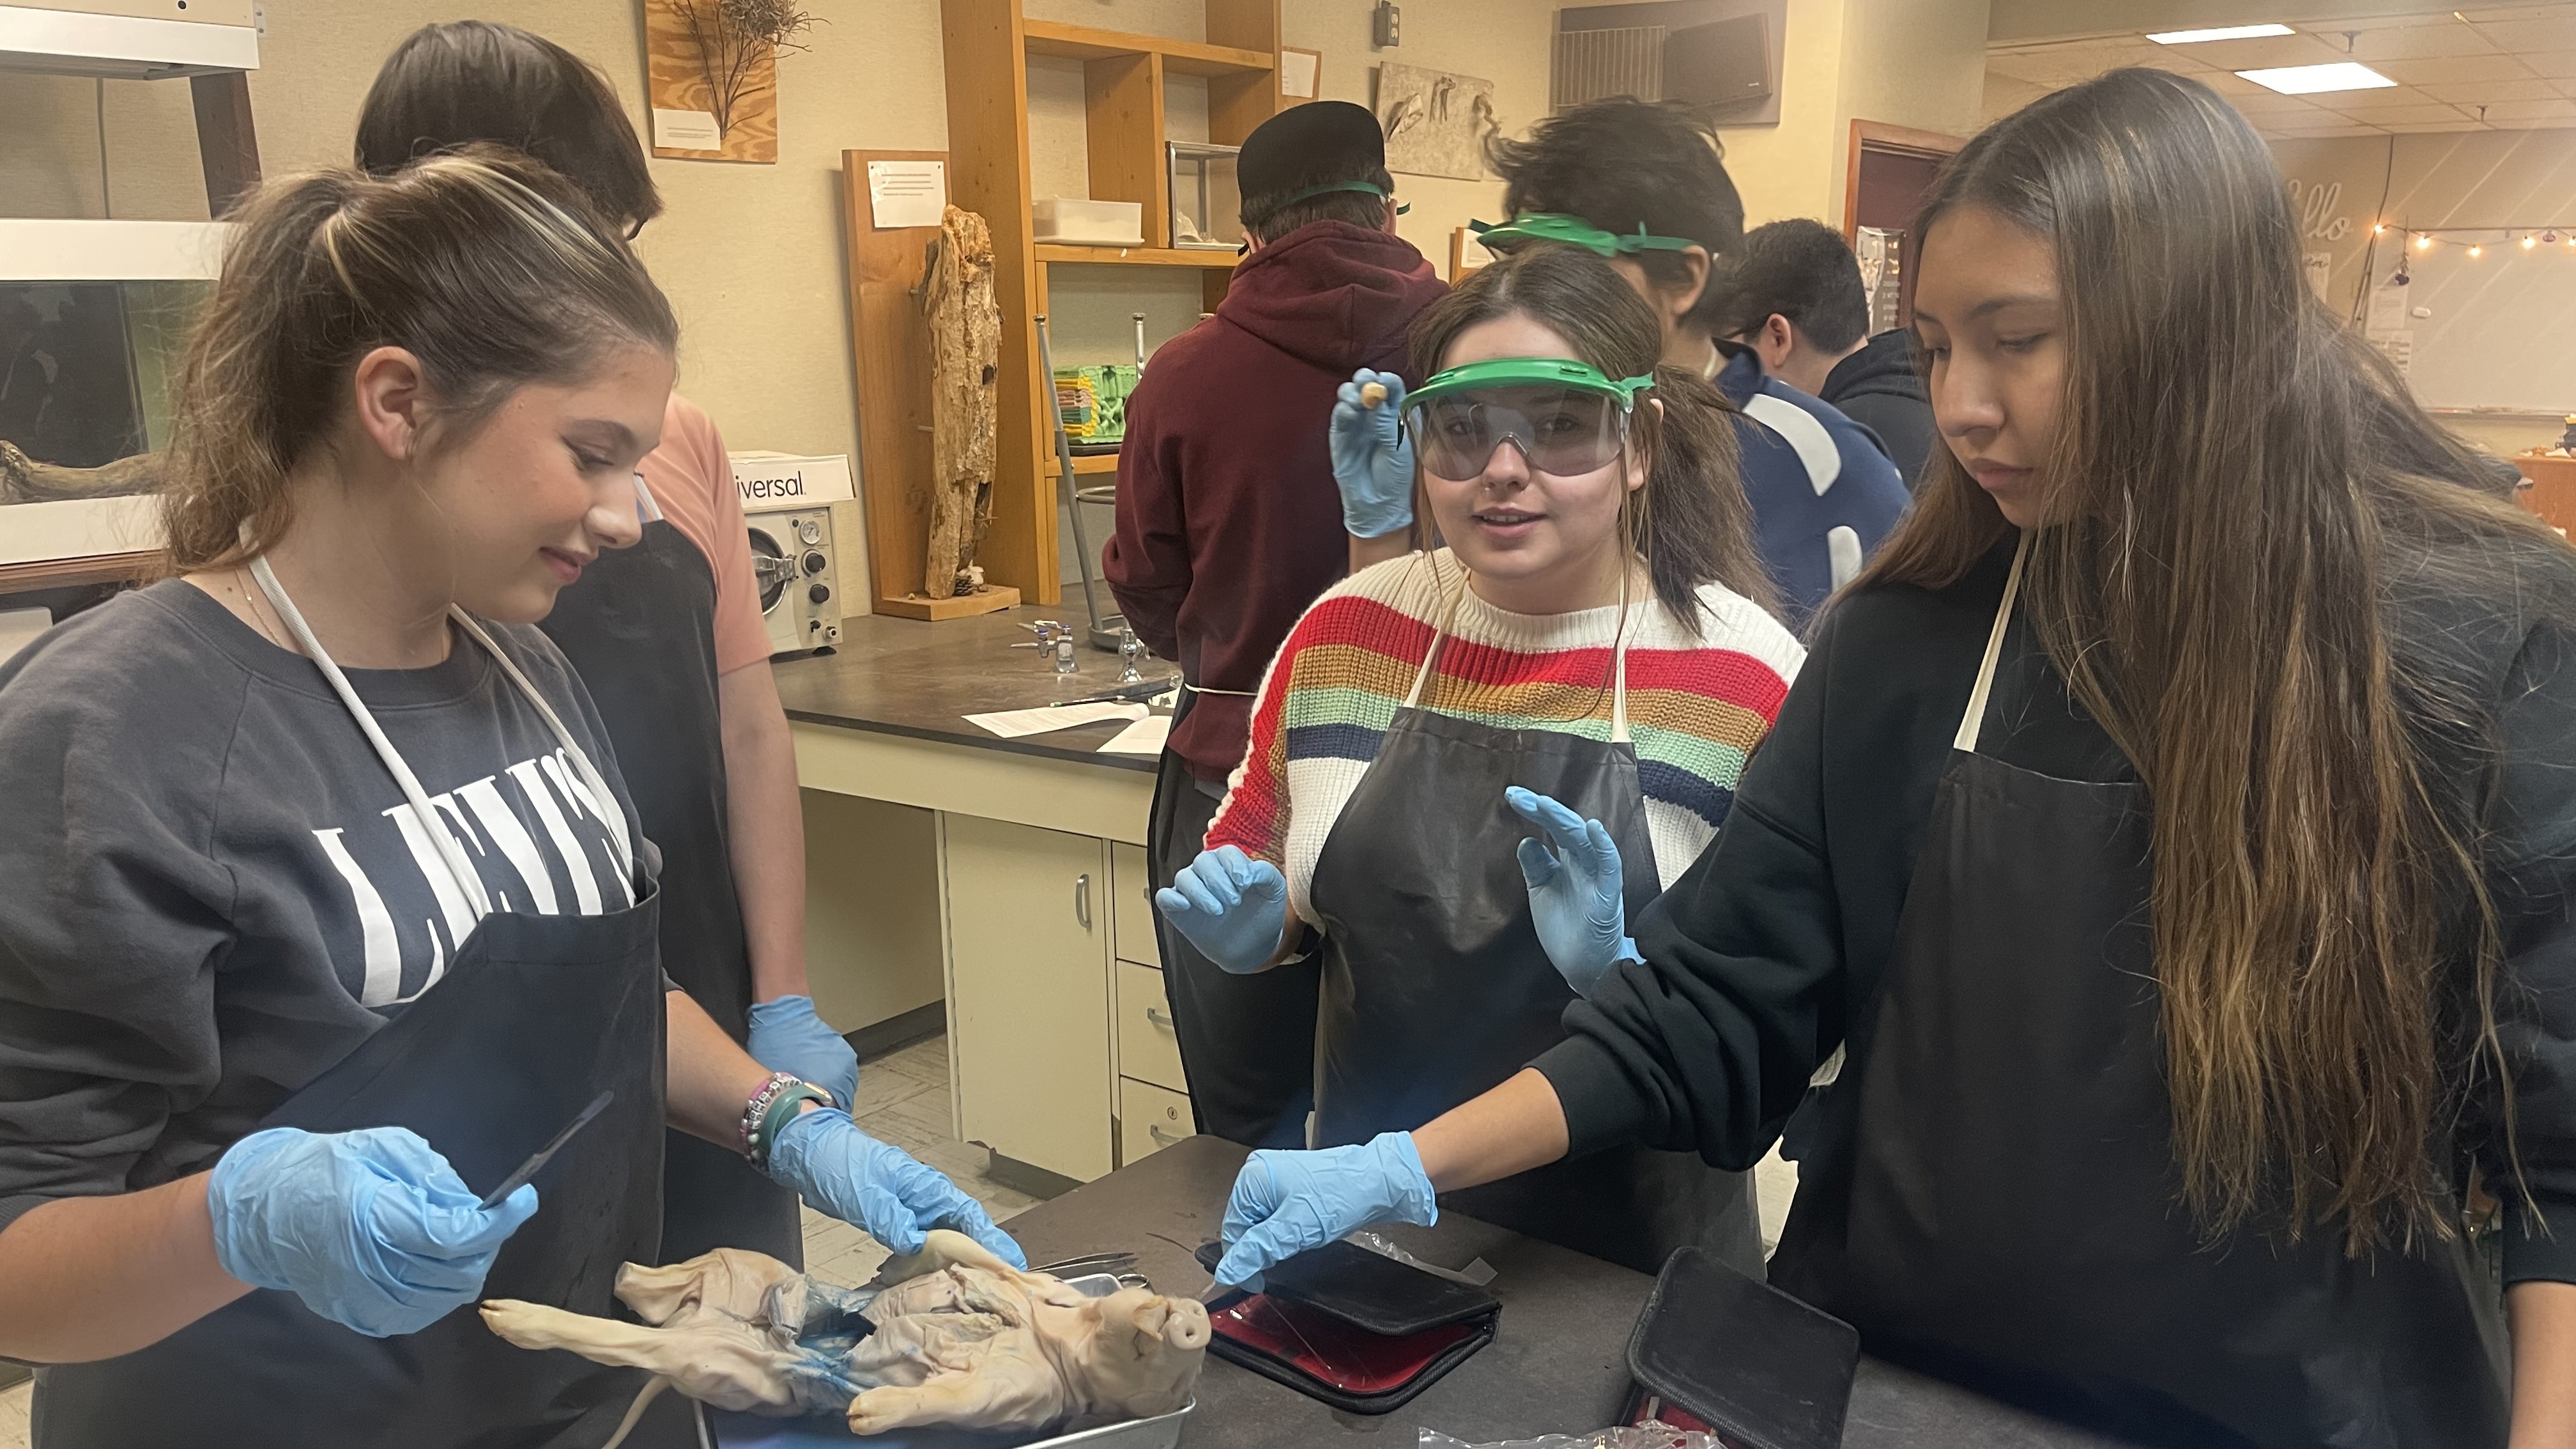 Lab dissection